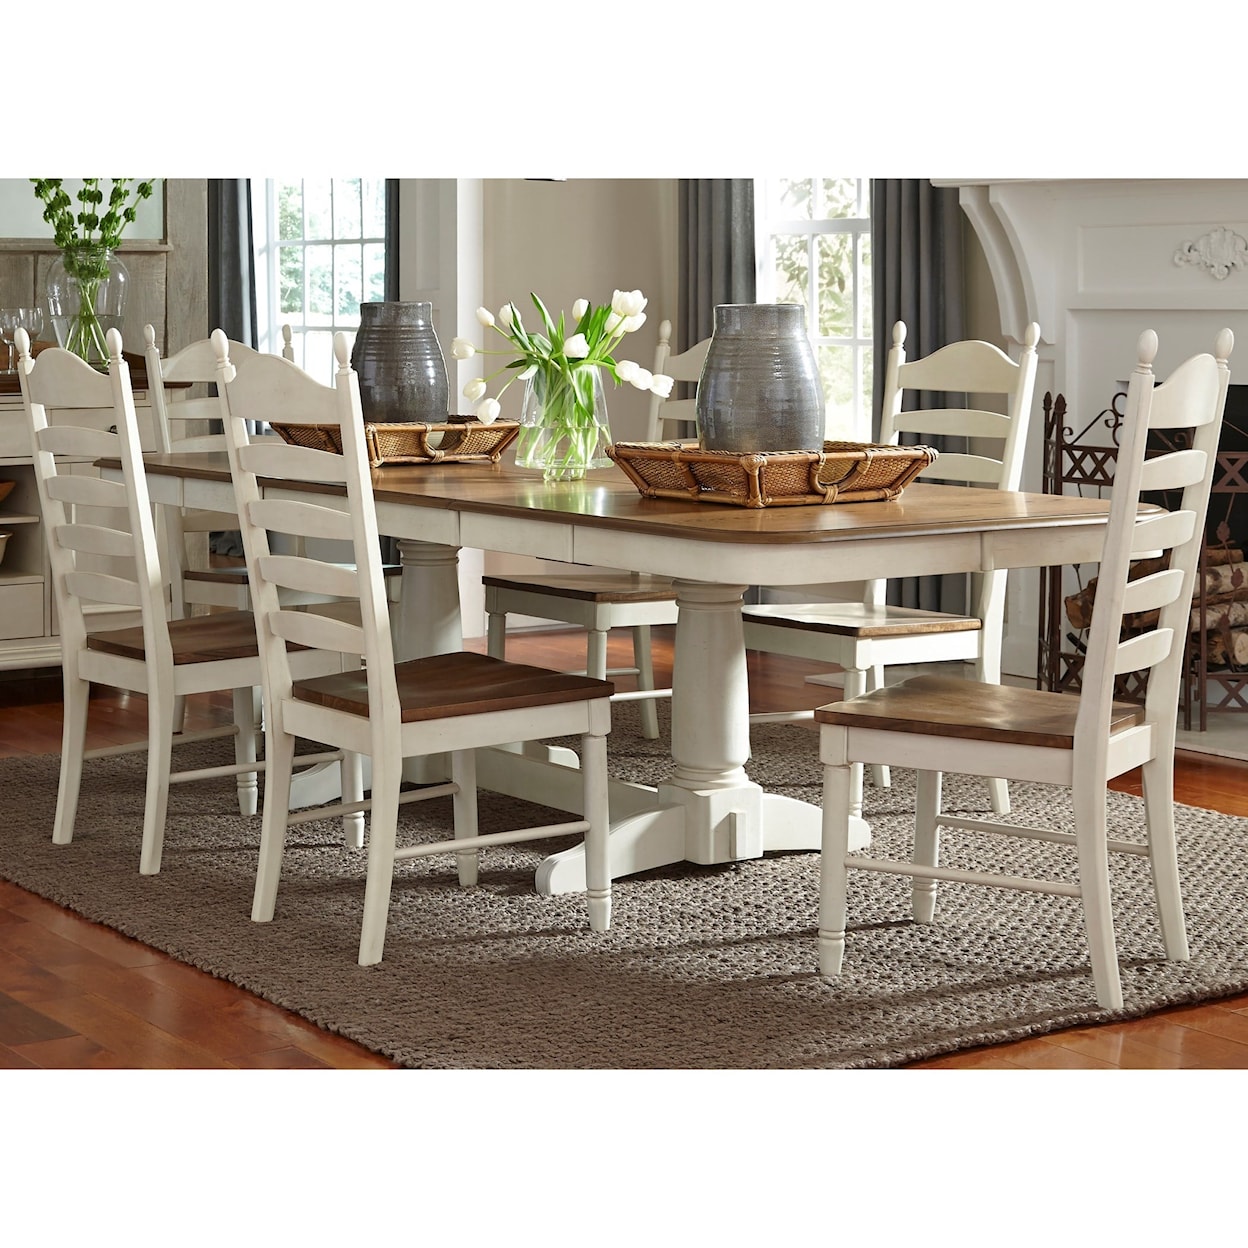 Liberty Furniture Springfield Dining 7-PieceTrestle Table Dining Set